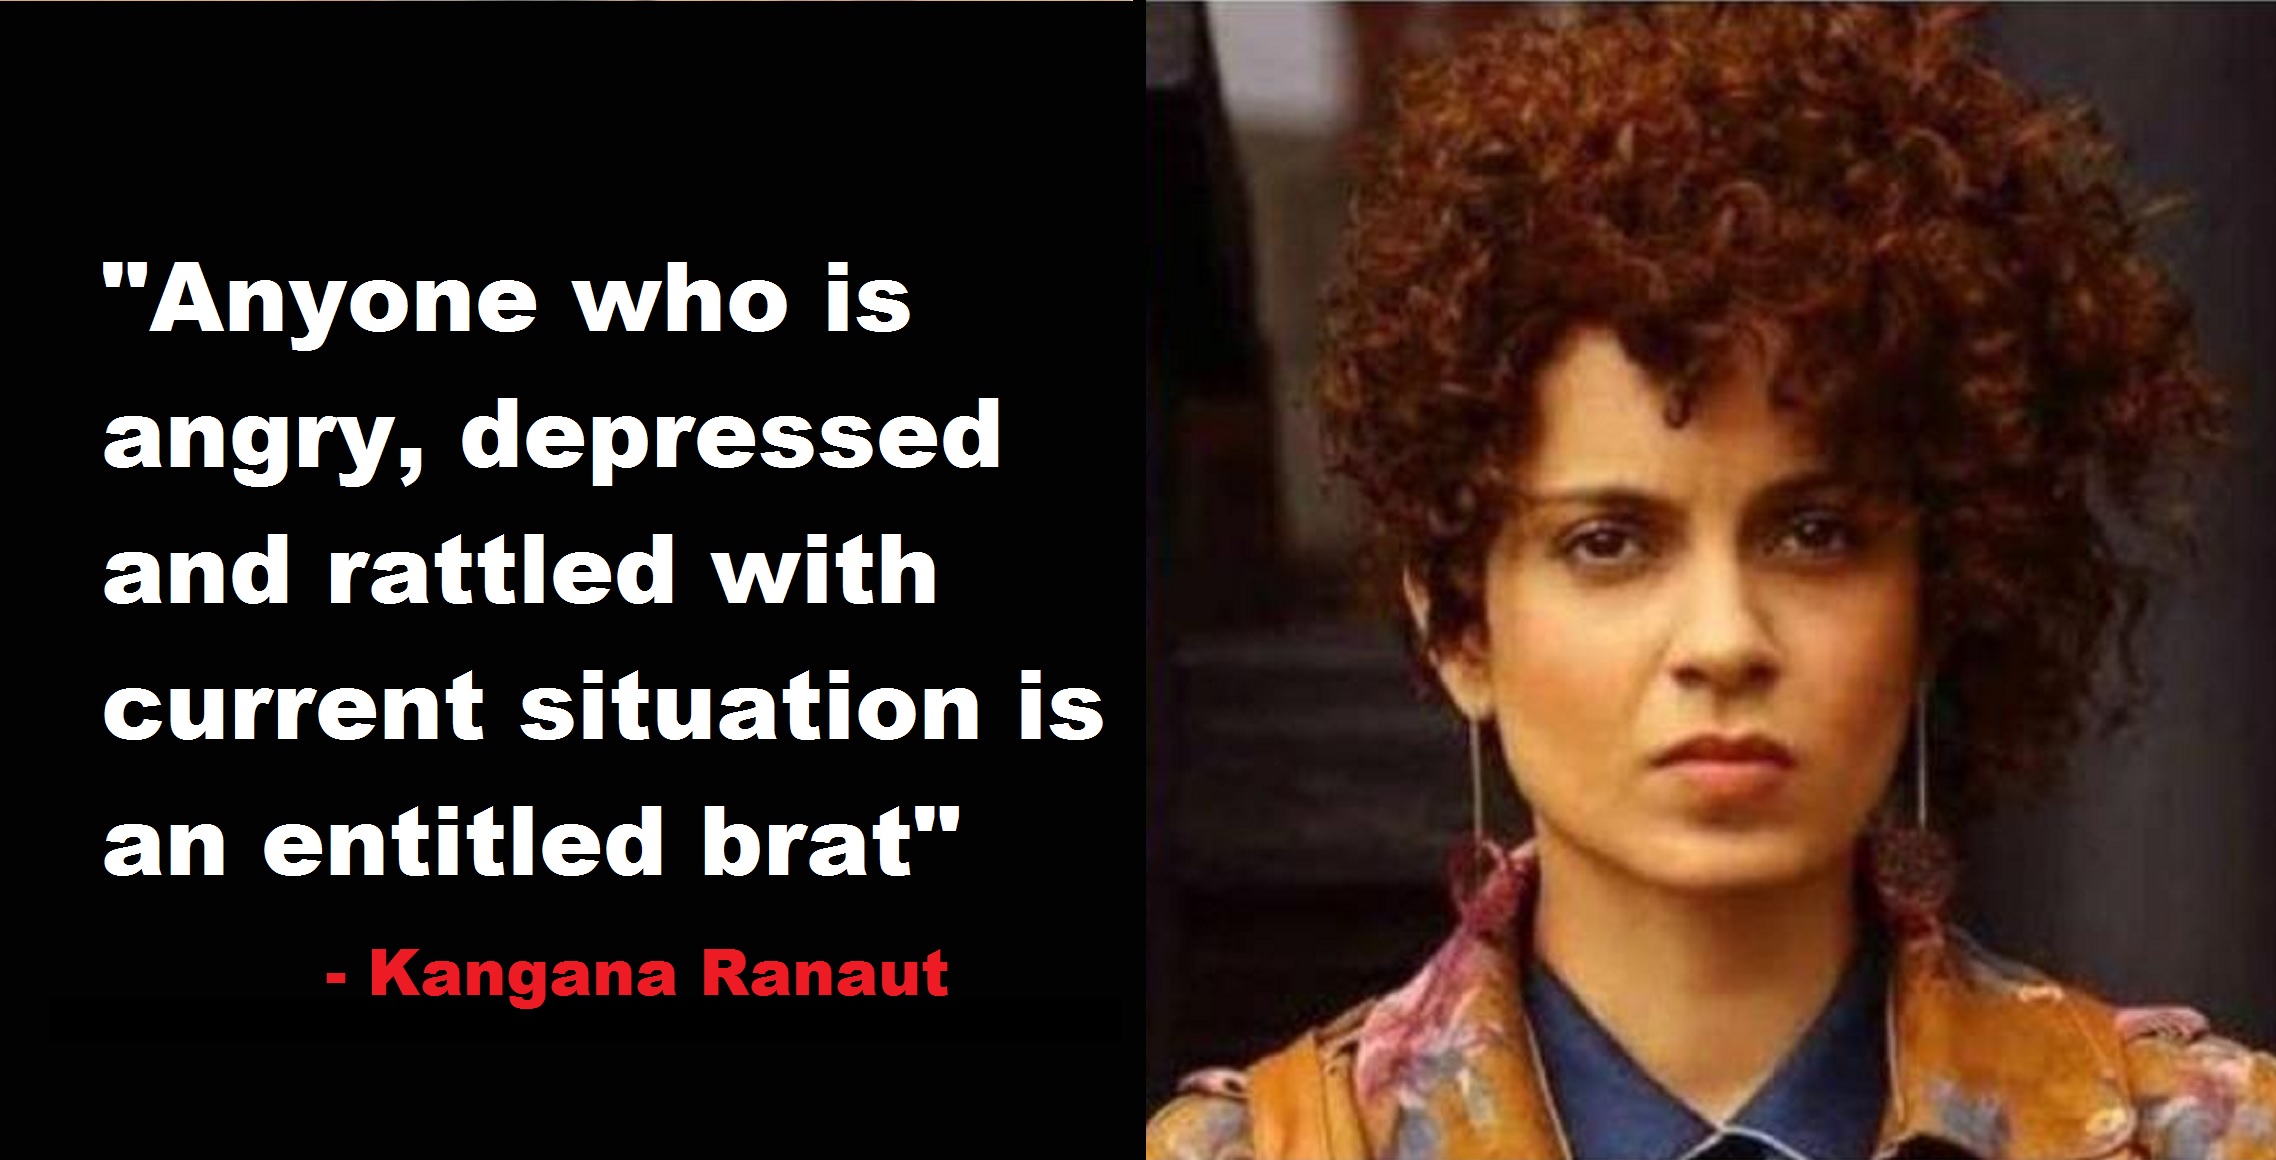 ‘Calm Down You Fools’ Says Kangana Ranaut To People Angry About Covid Situation, Twitter Calls Her ‘Insensitive’